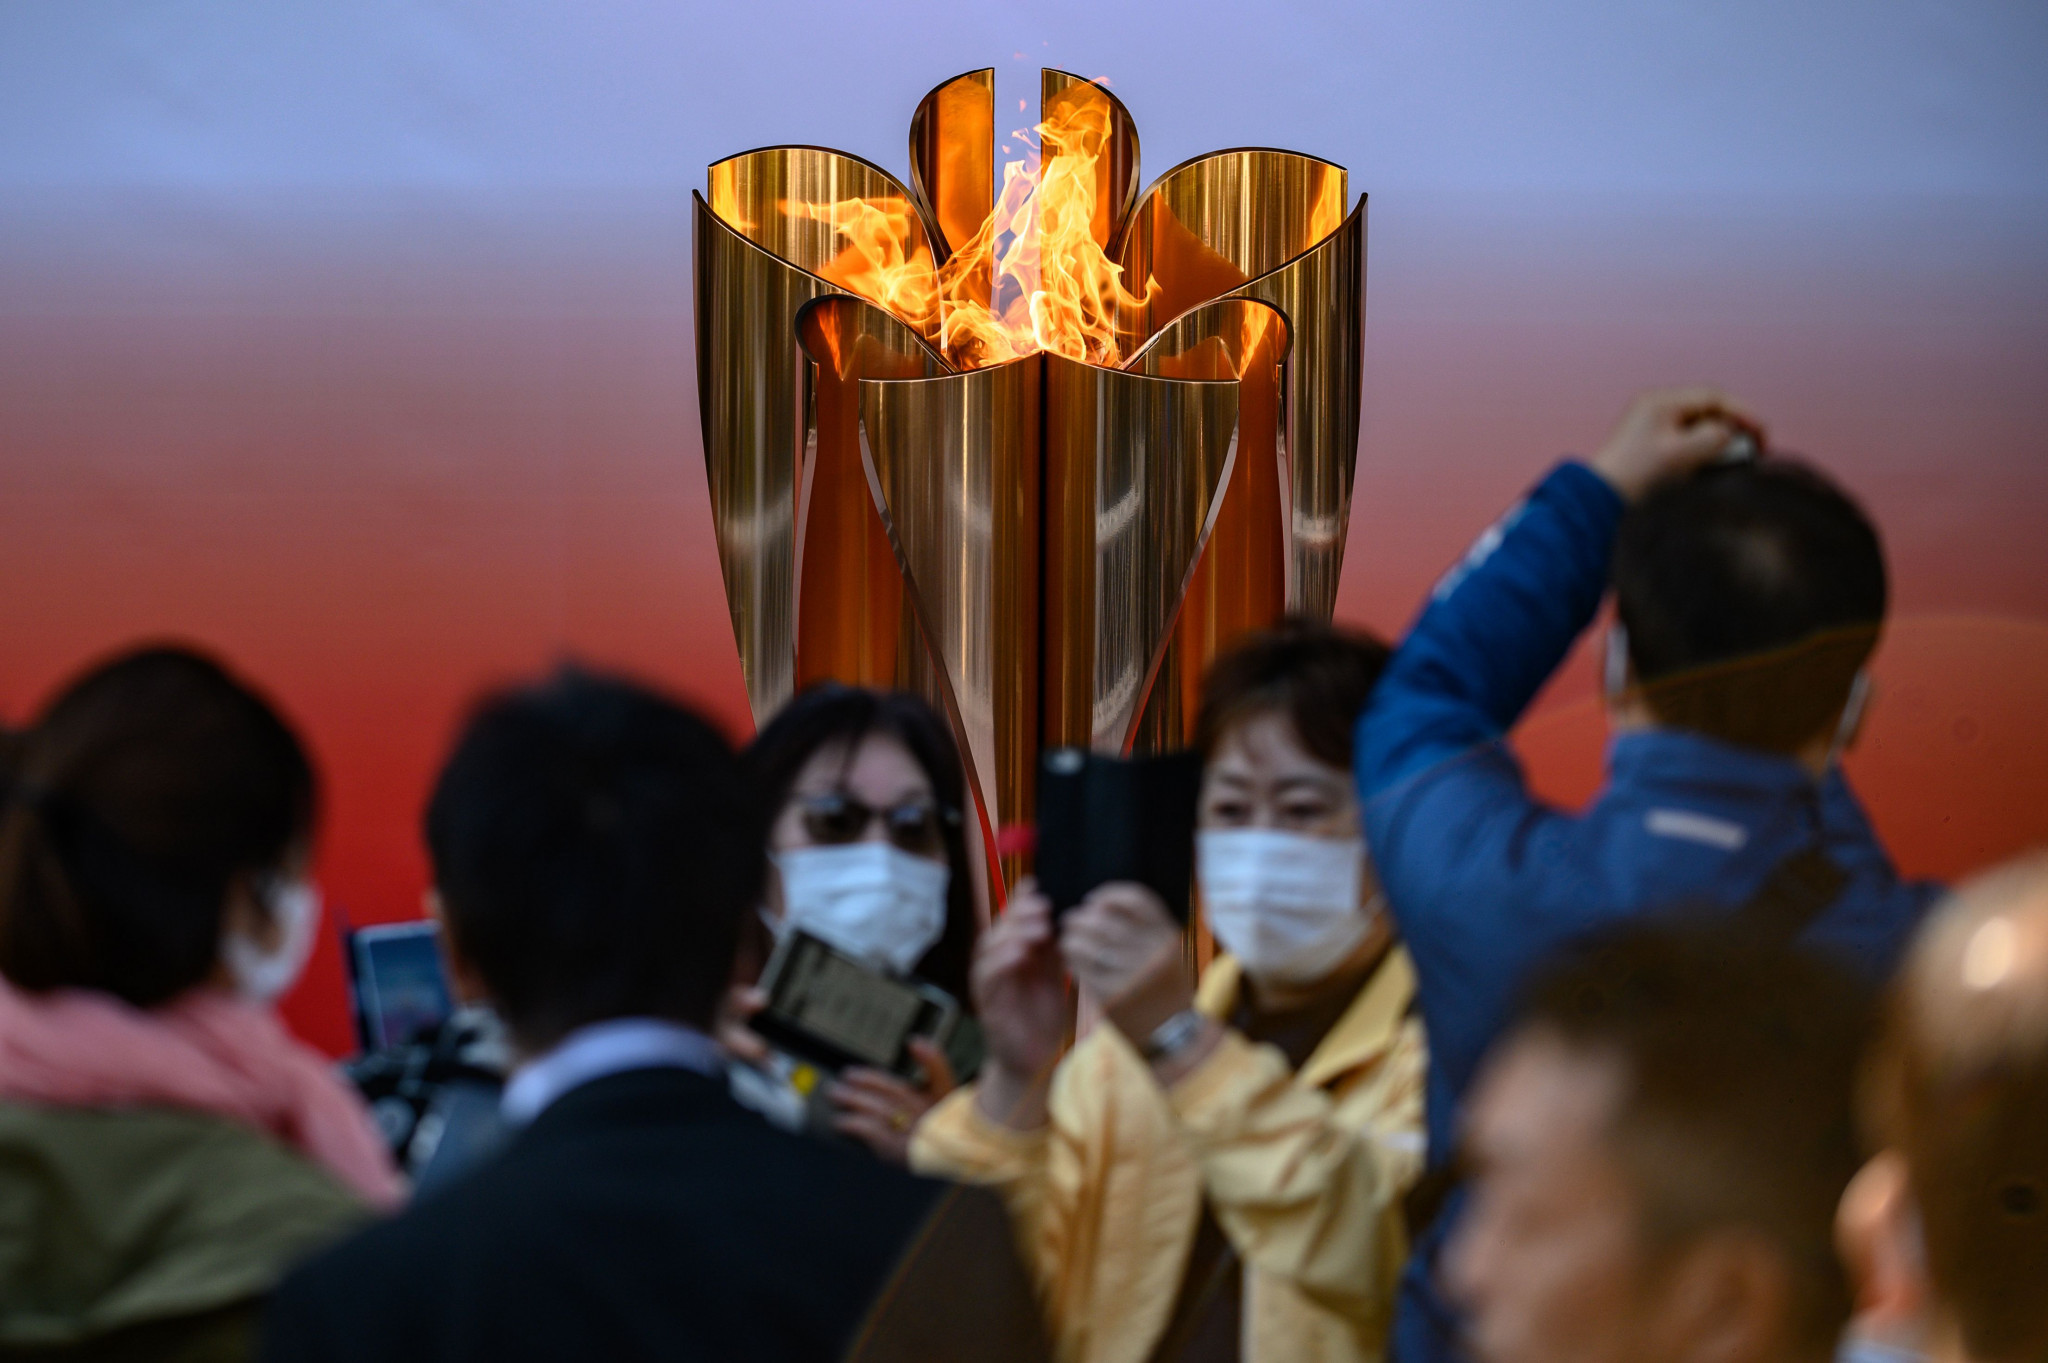 Large crowds defied fears over coronavirus to visit the Olympic flame at Sendai station in Tokyo when it was put on display in March ©Getty Images